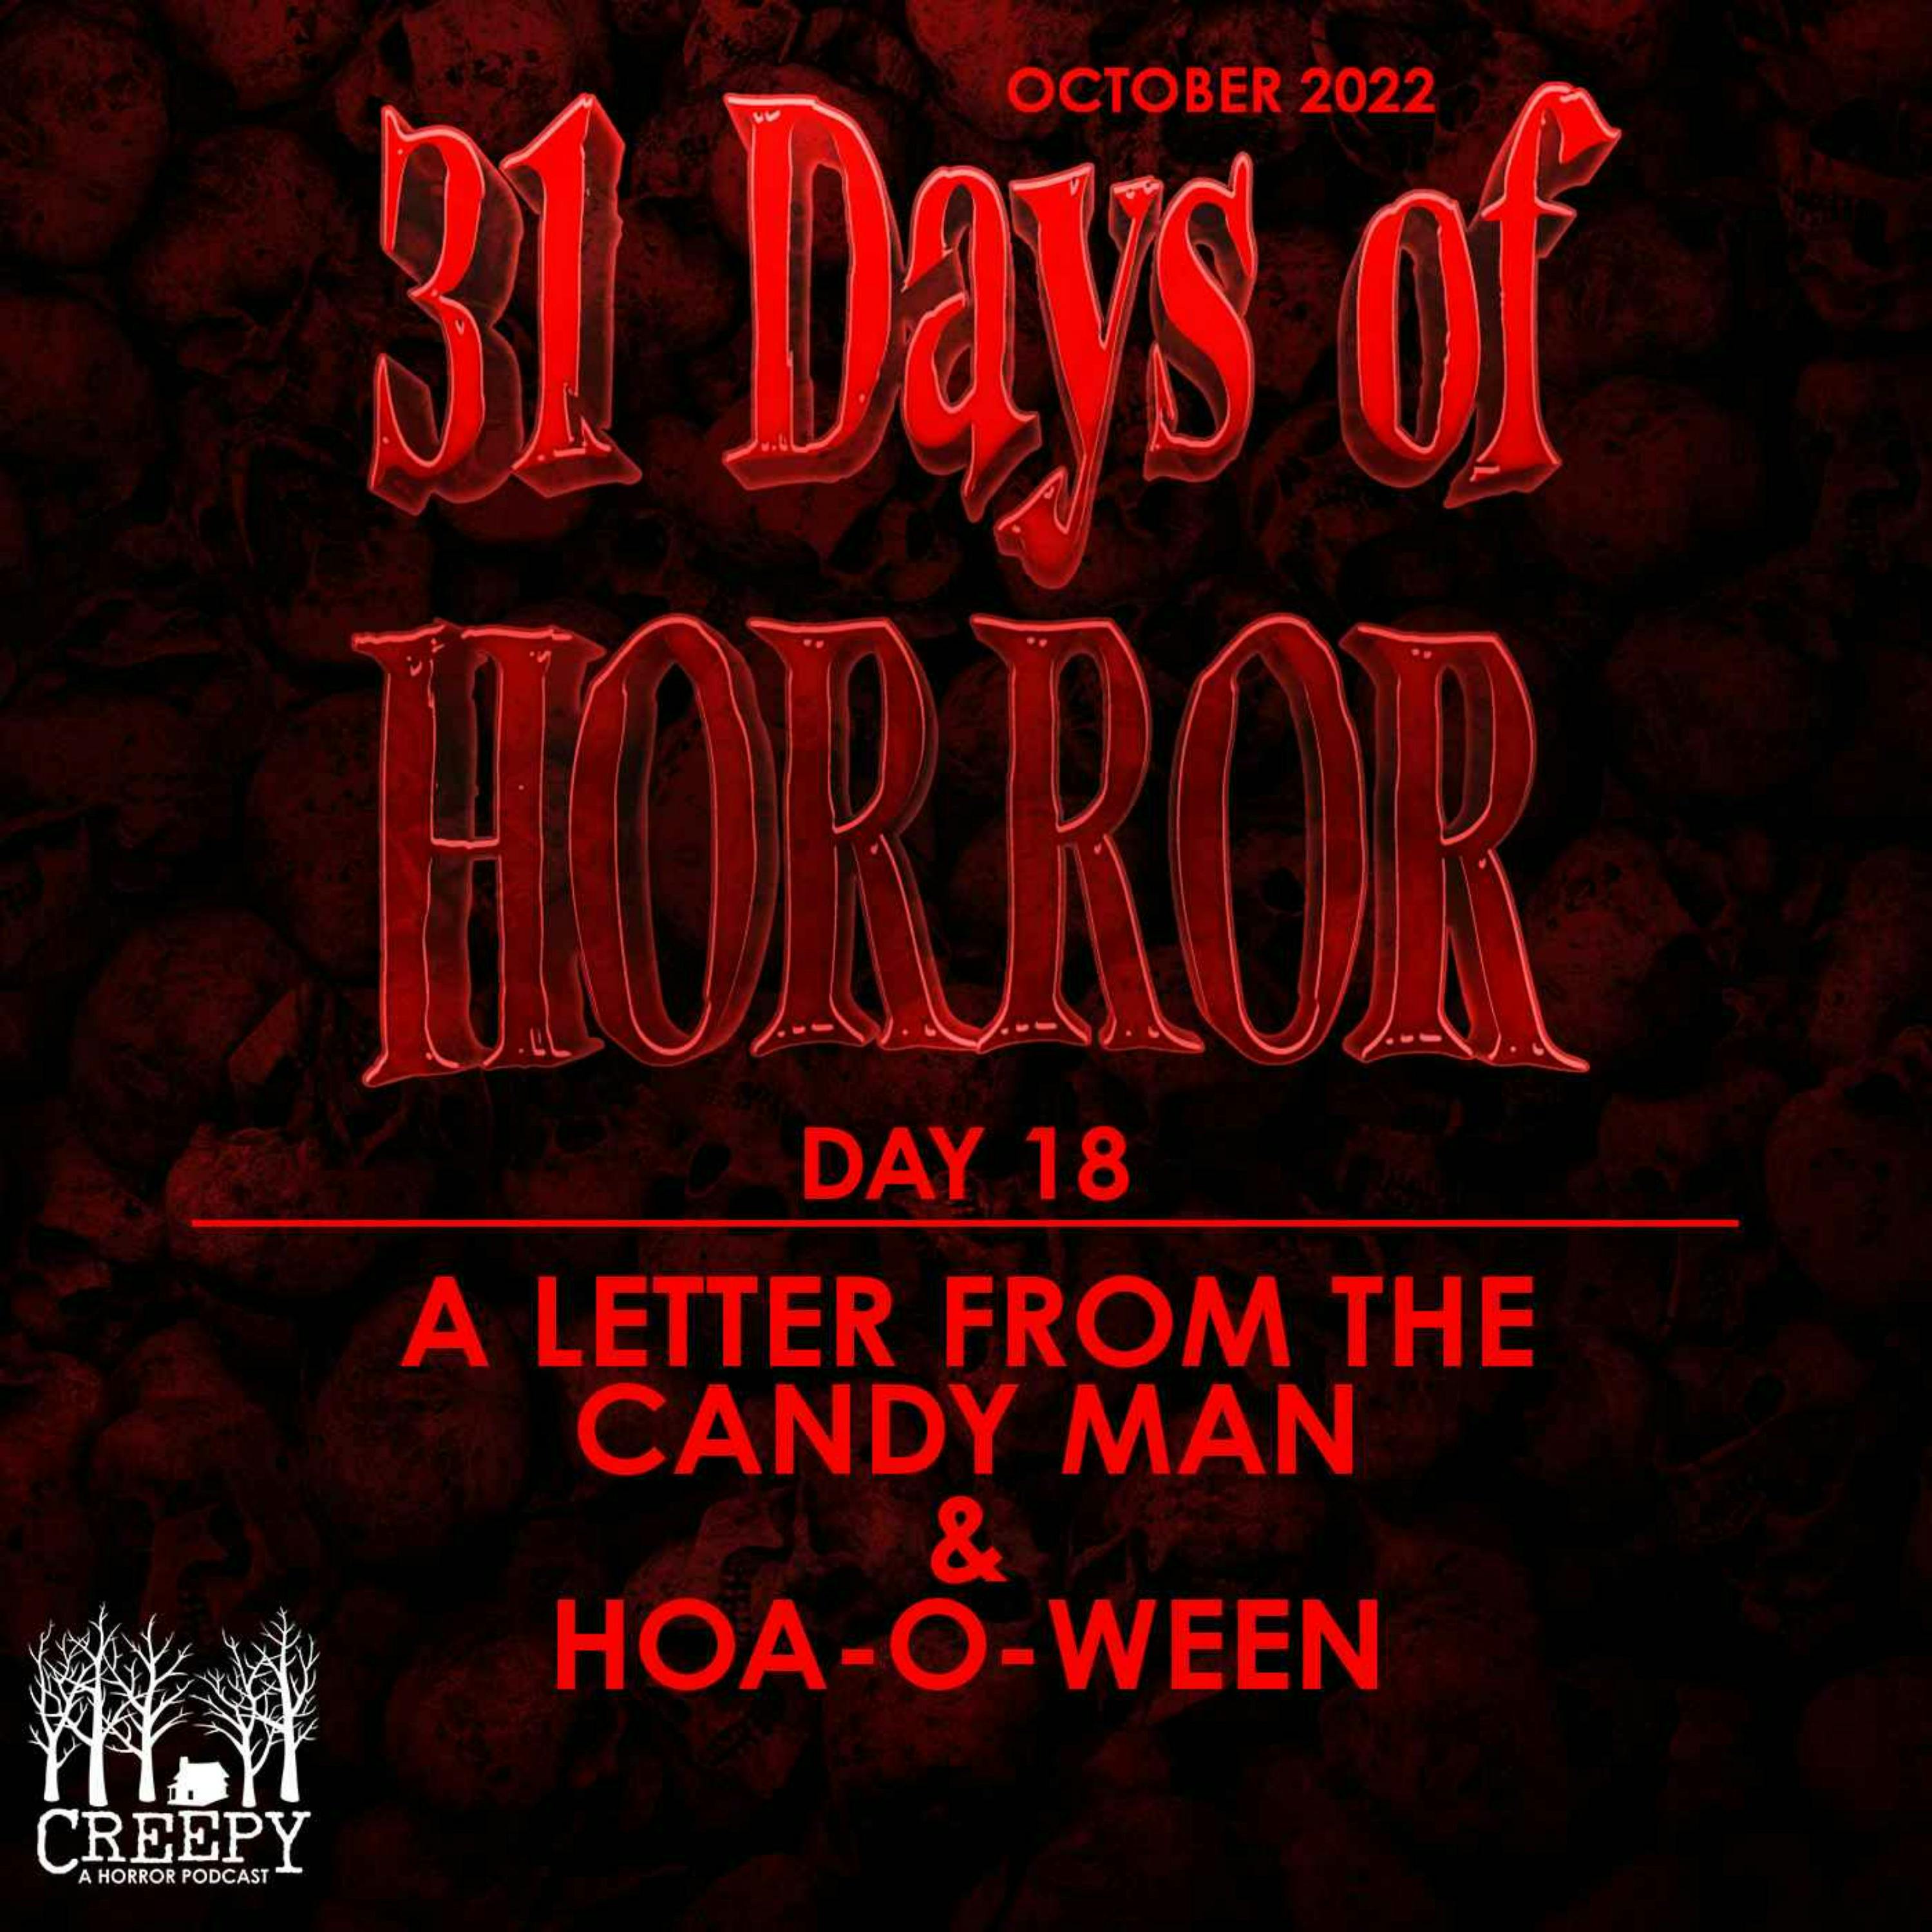 Day 18 - A Letter From the Candy Man & HOA-o-Ween